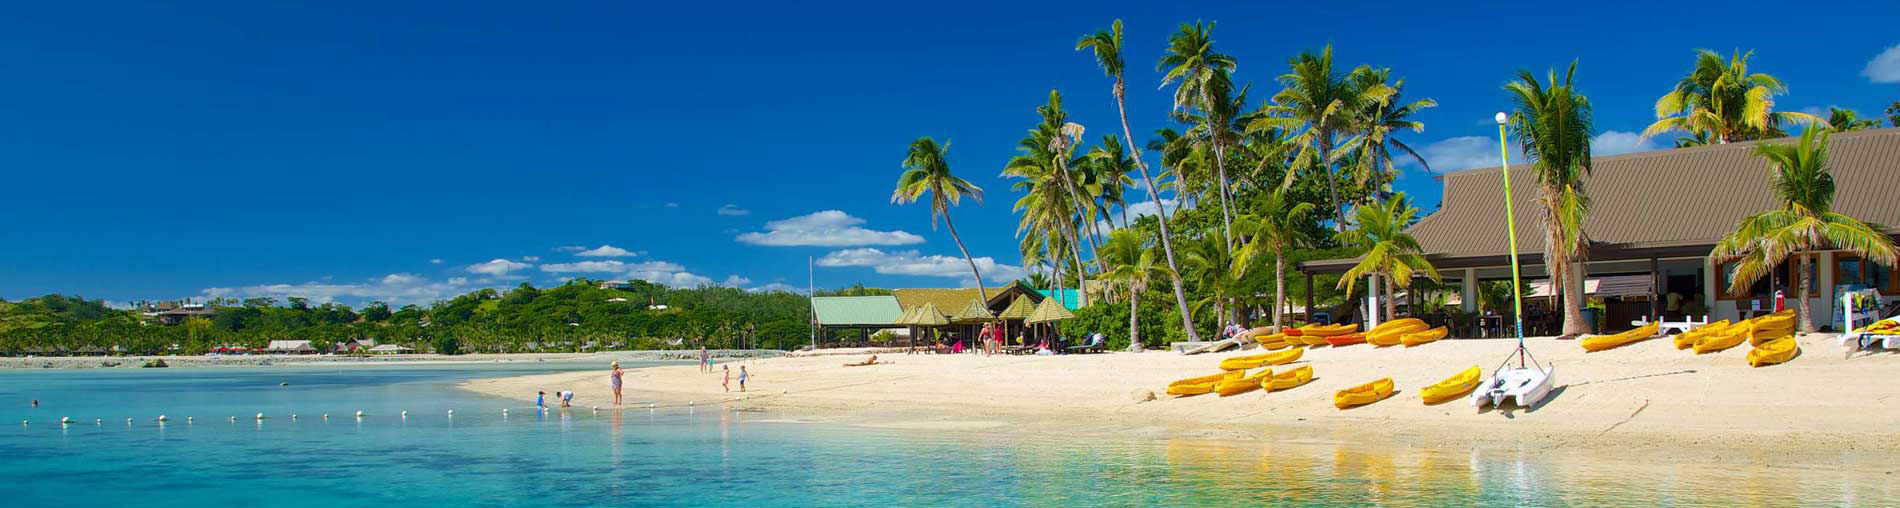 Fiji Island Holiday Tour Packages From India